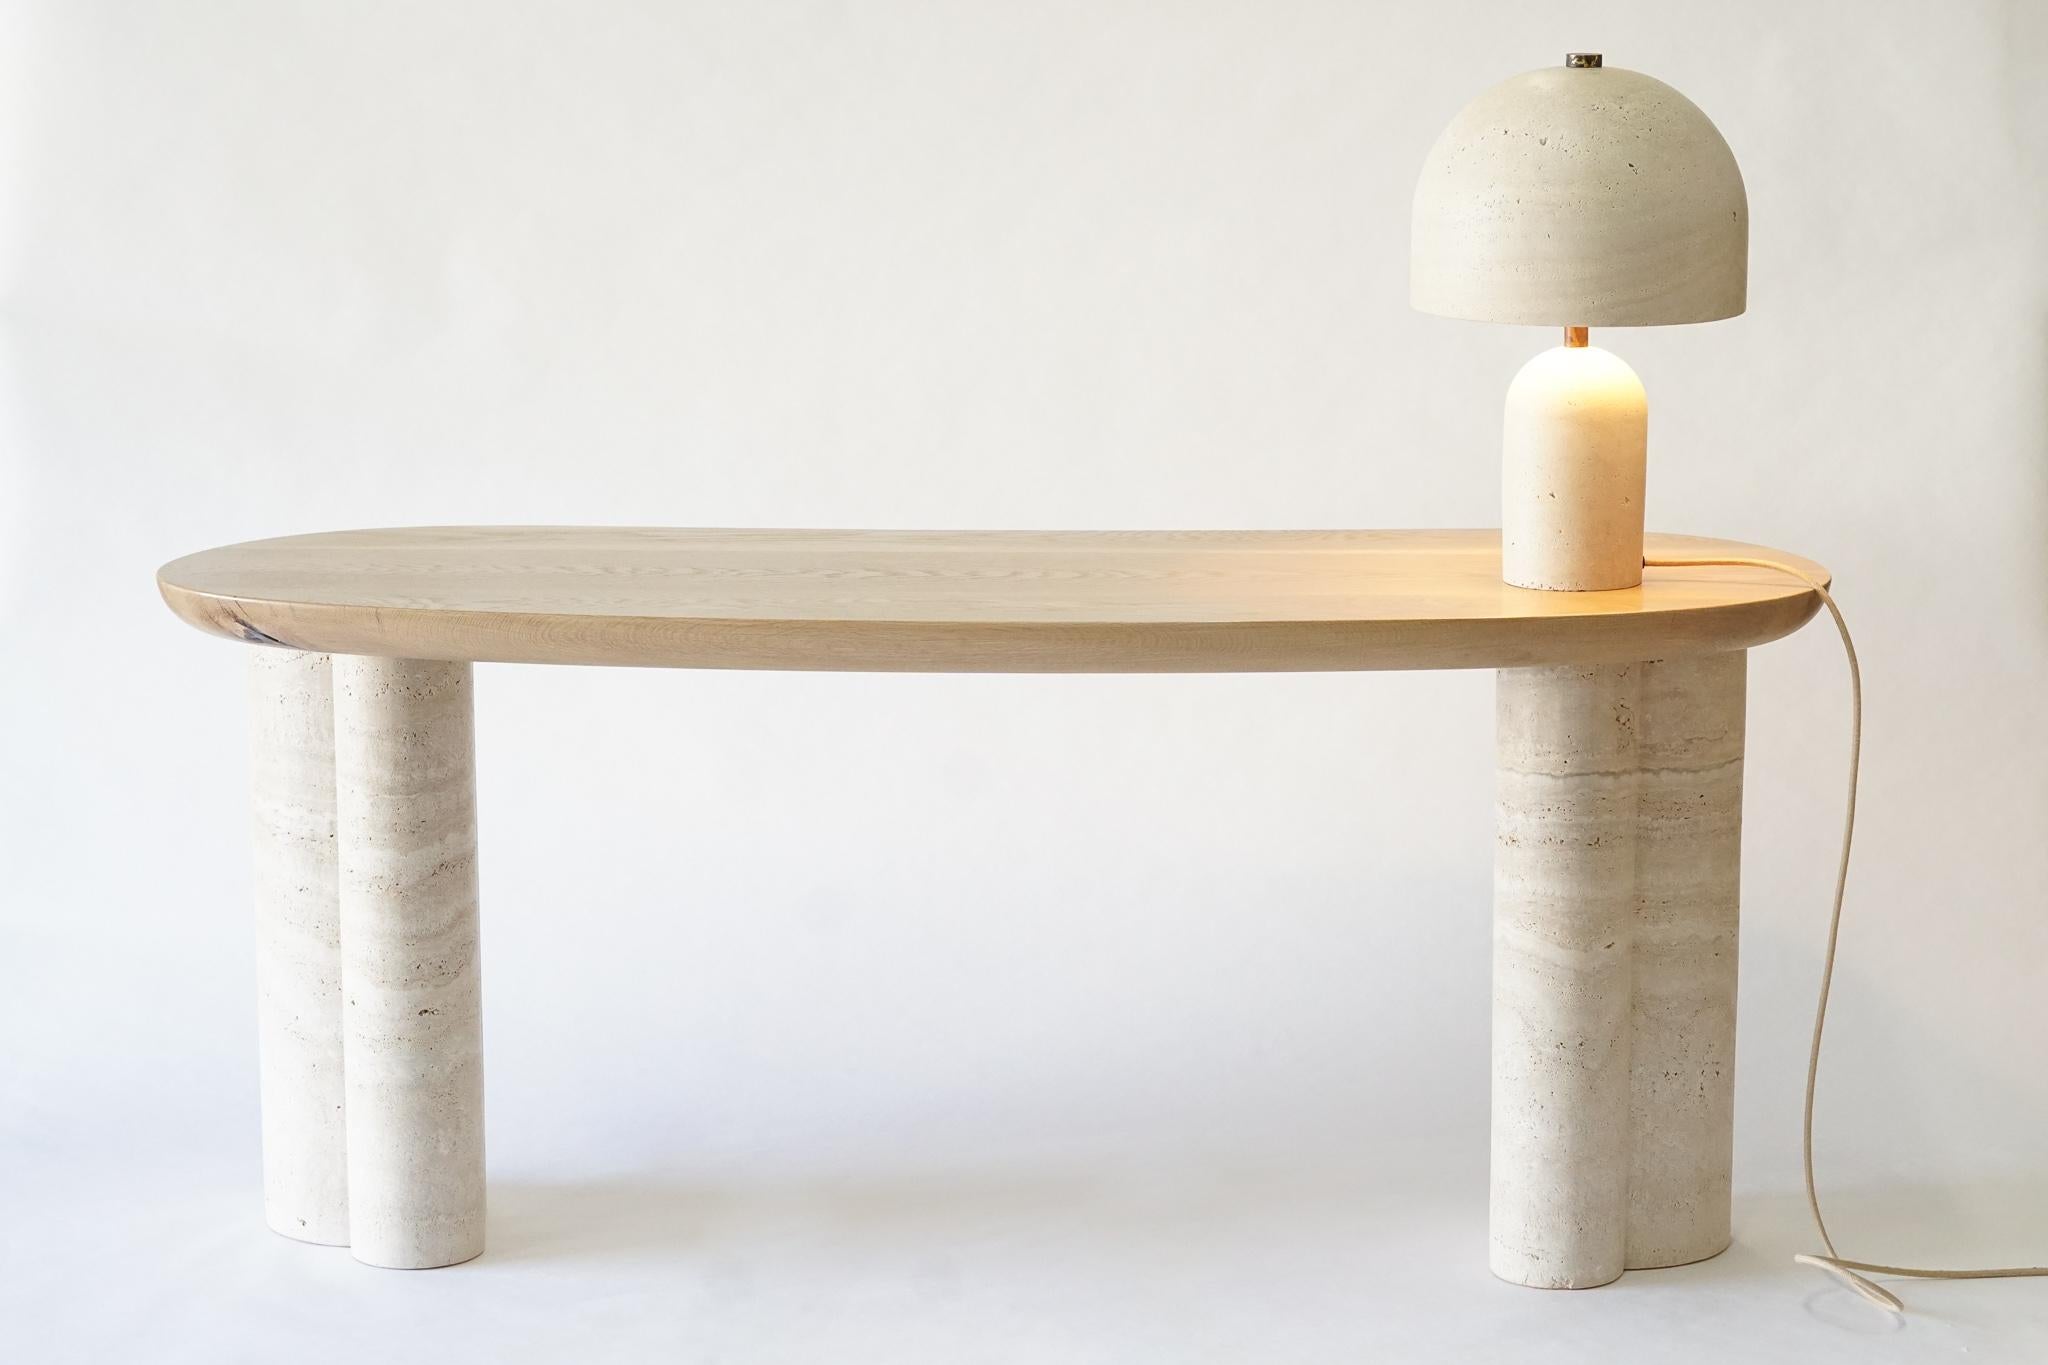 Set of Onna desk and table lamp by Swell Studio
Dimensions: D 153 x W 76 x H 76 cm 
Materials: alabastrino travertine and white oak.
Also available in variety of finish options. 

The Onna desk is the second edition to our ever expanding Onna